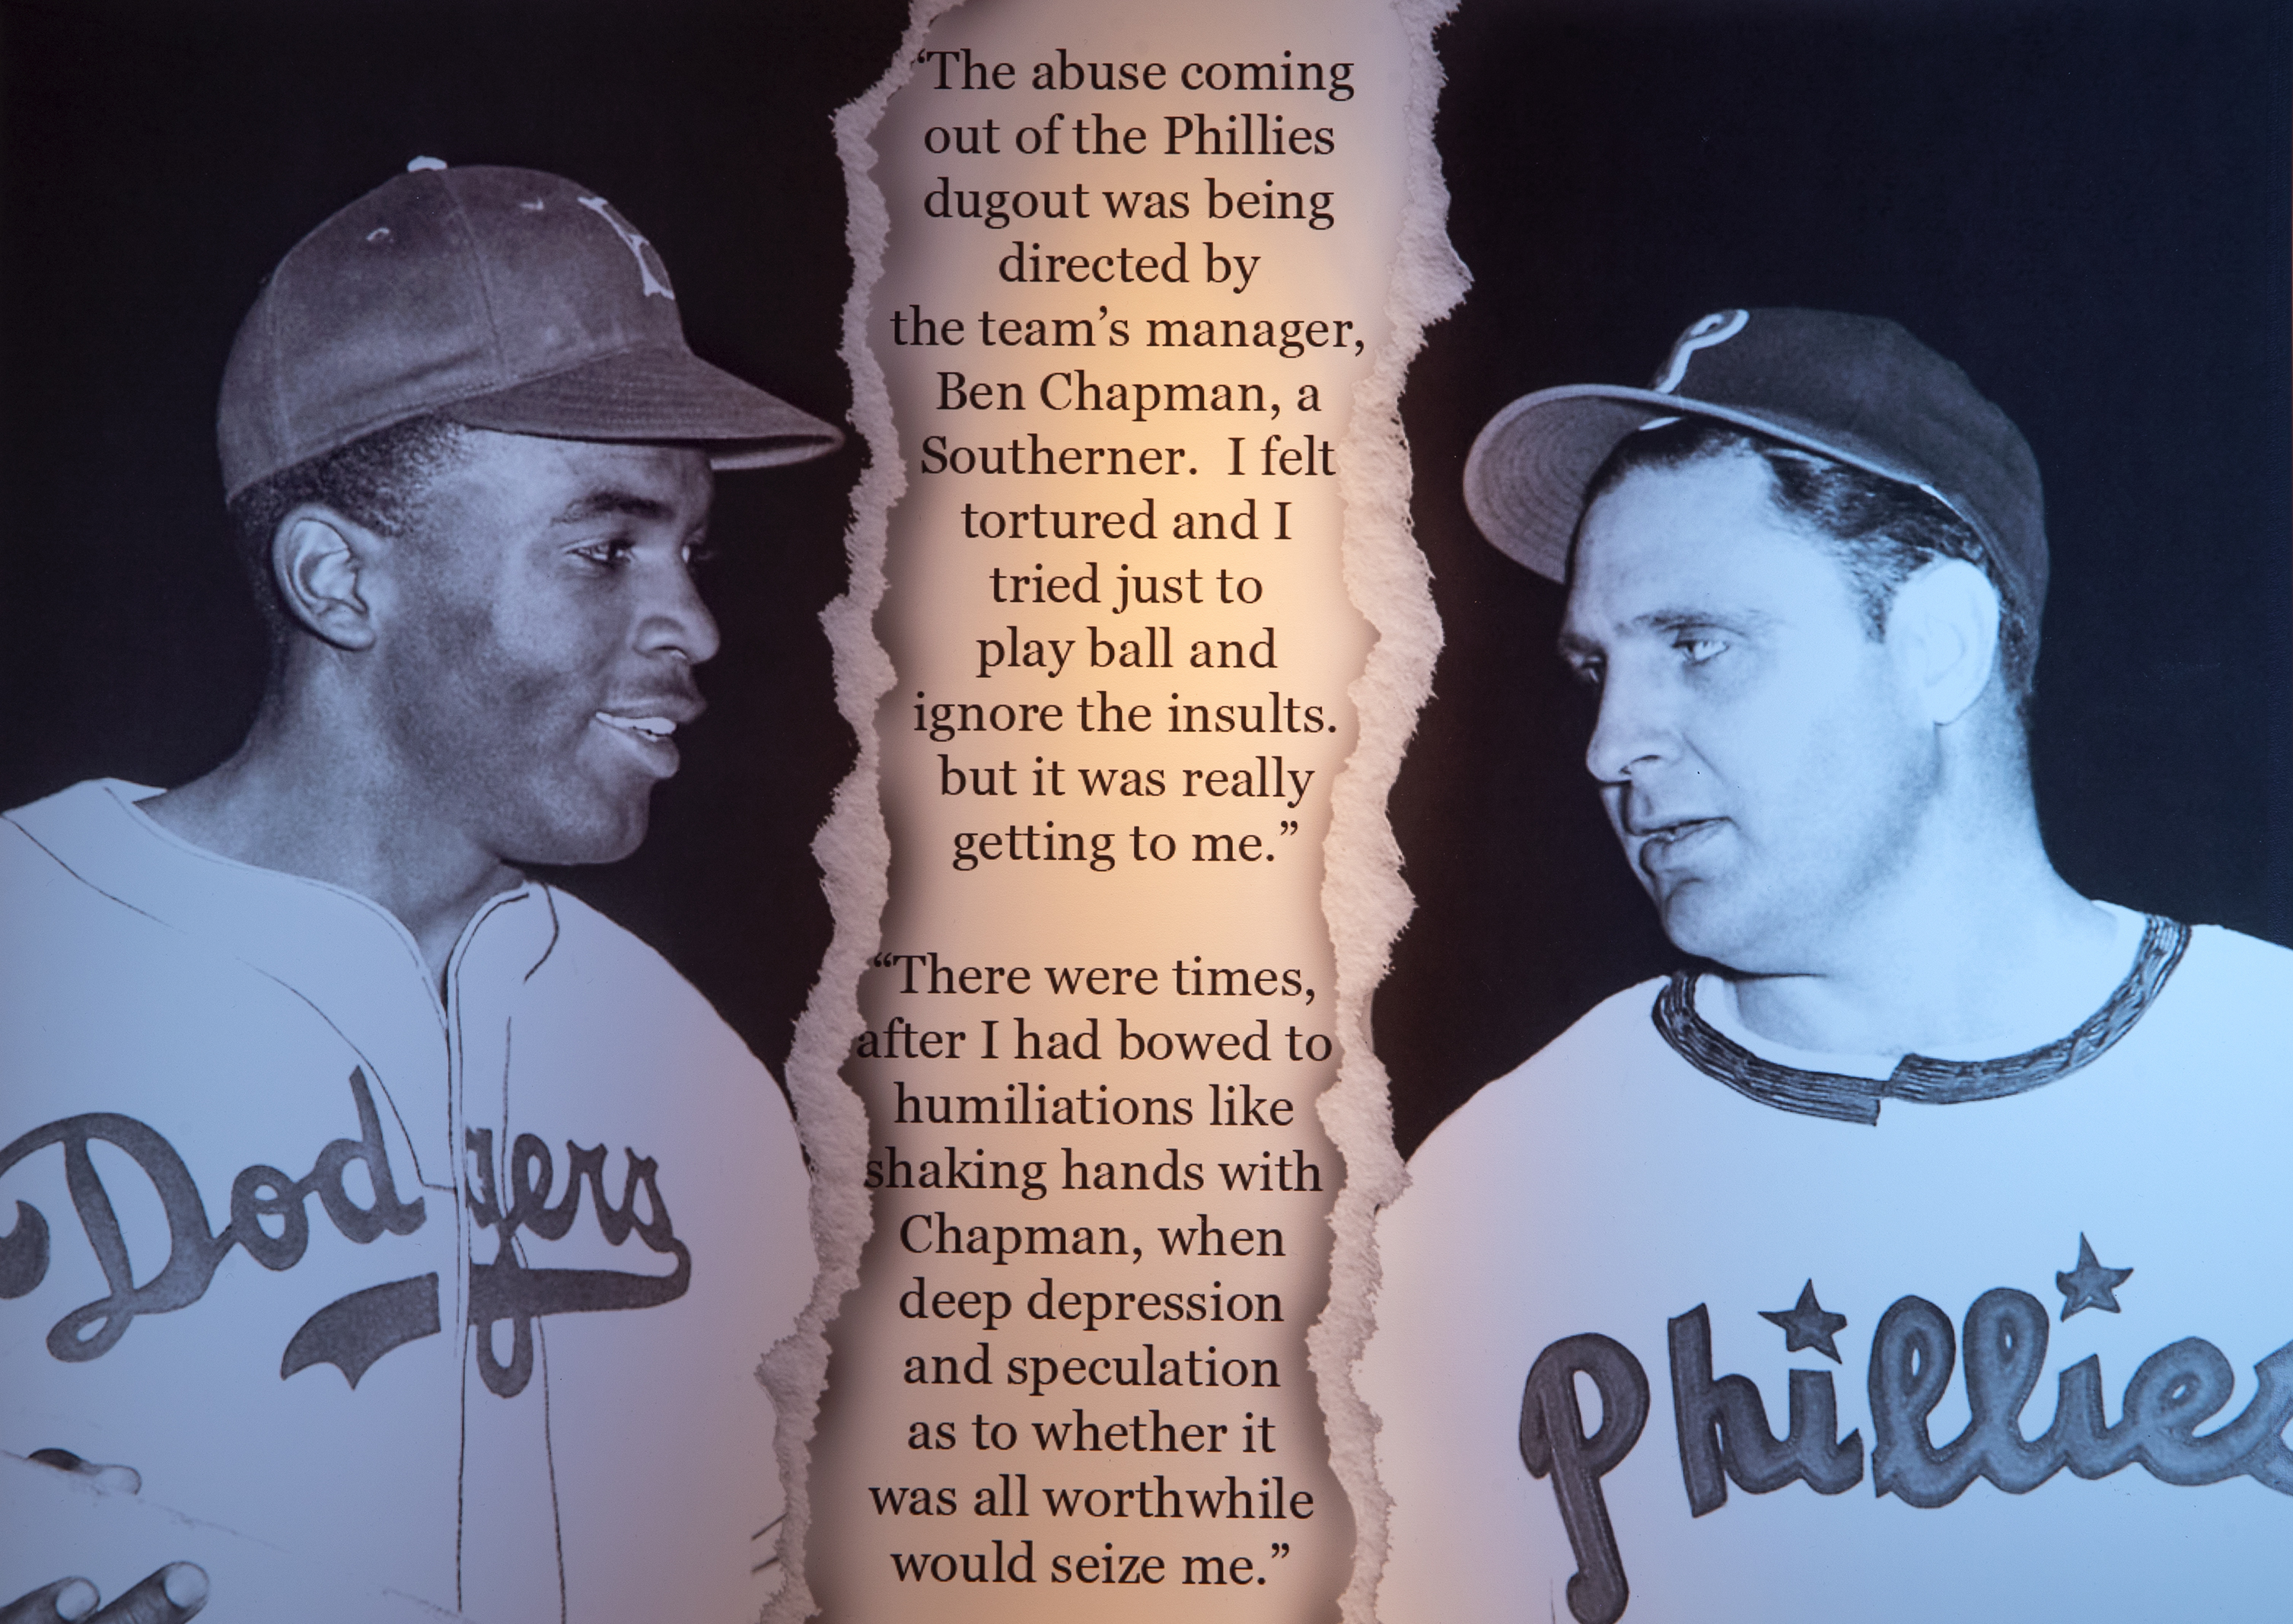 jackie robinson and phillies manager